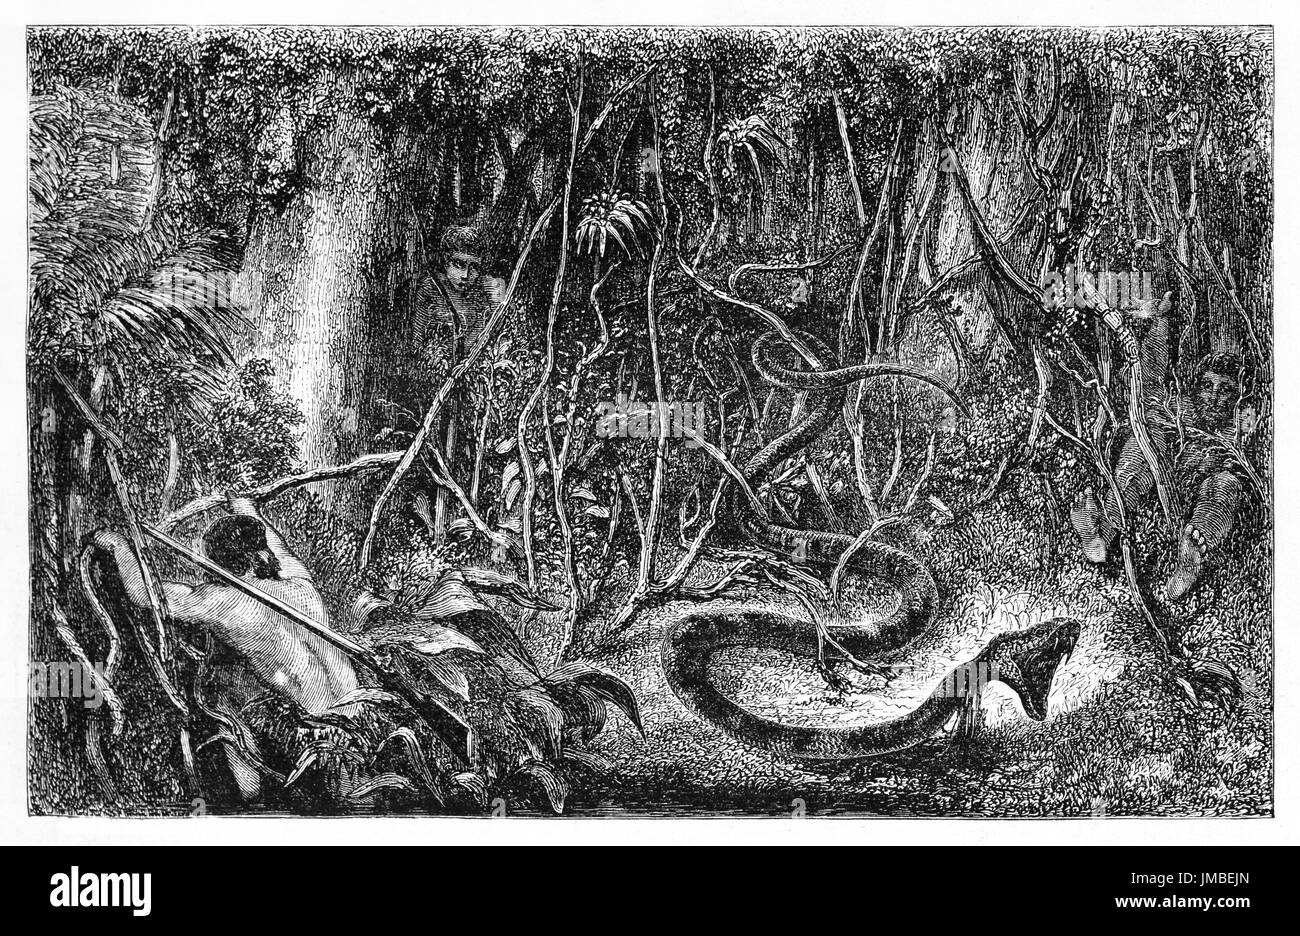 Sucuriju, mythical amazonian giant snake, realistically an Anaconda, attacking from dark jungle vegetation. Etching style art by Minne and Rondé 1861 Stock Photo